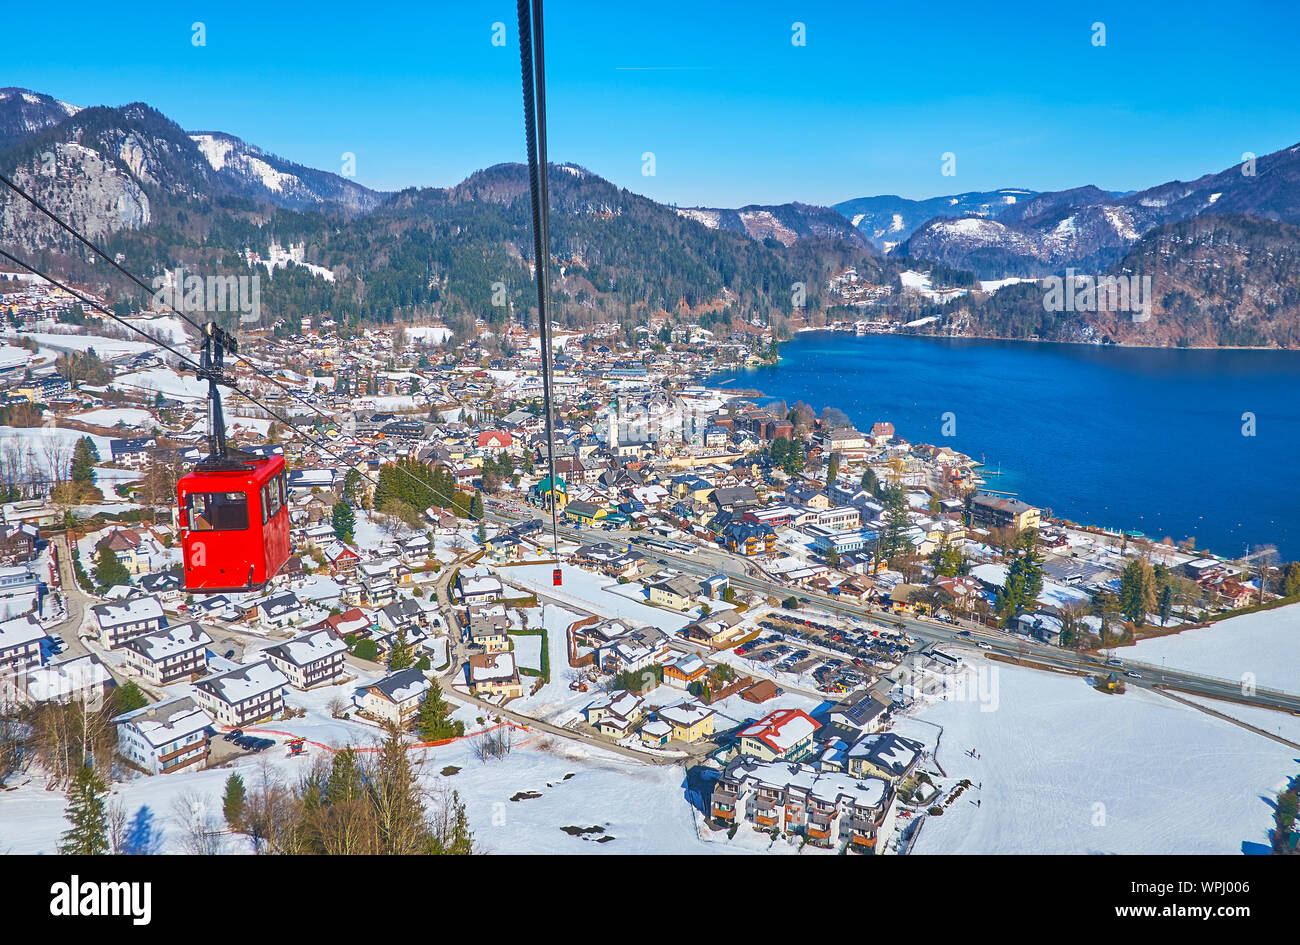 The view from the Zwolferhorn cable car on snowy village of St Gilgen, located on the bank of Wolfgangsee lake, Salzkammergut, Austria Stock Photo